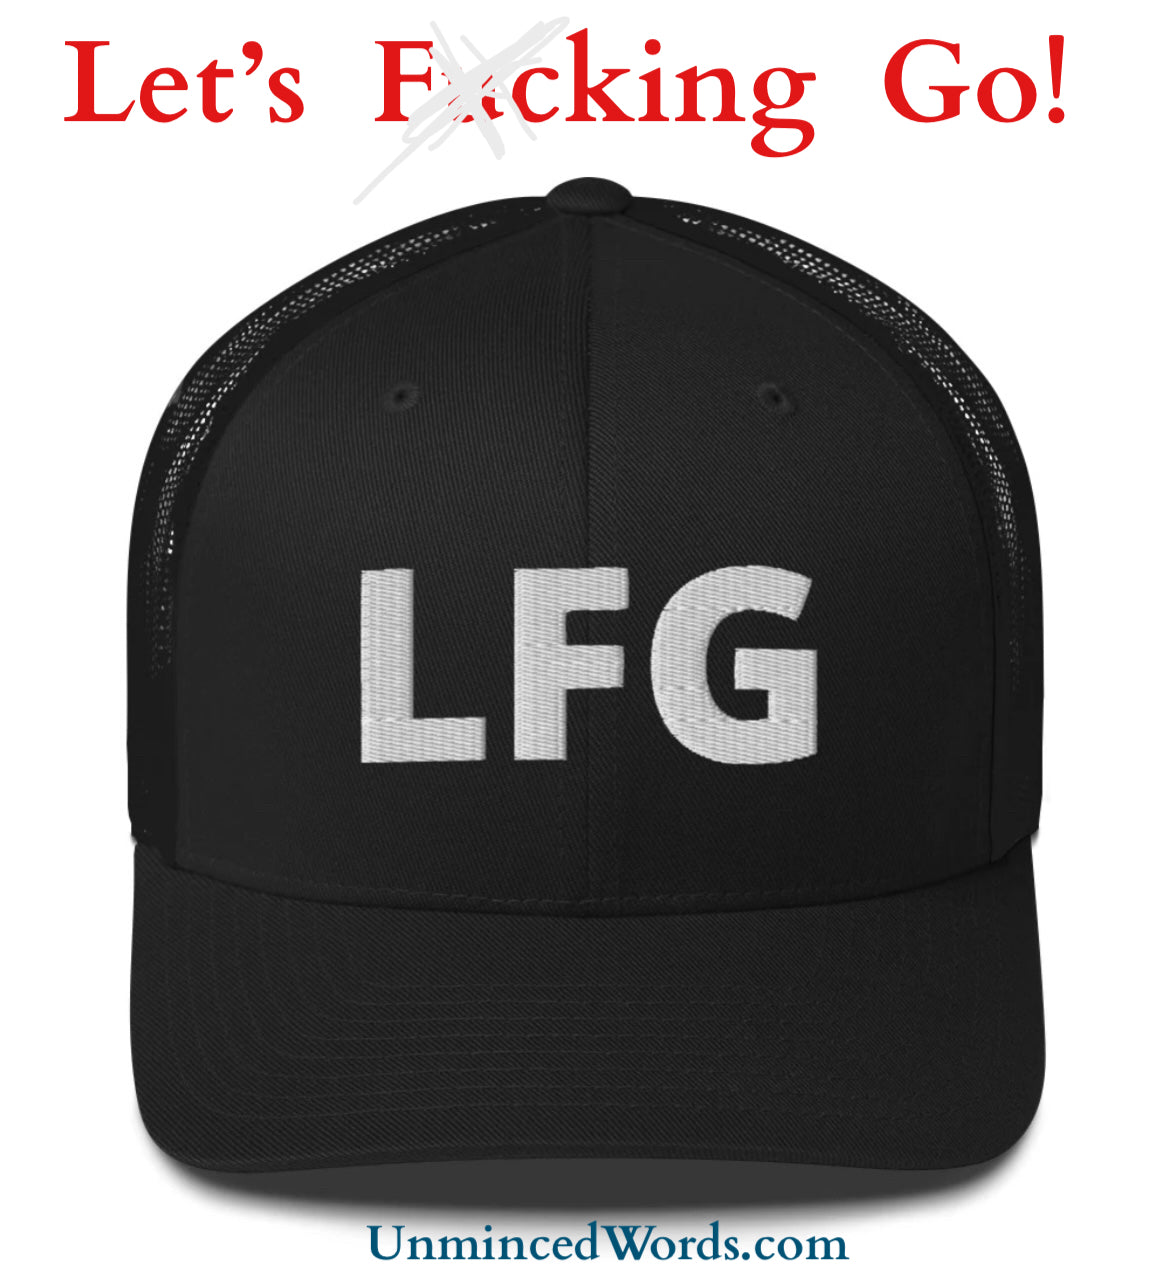 The LFG collection has something to say: LET’S F*CKING GO!!!